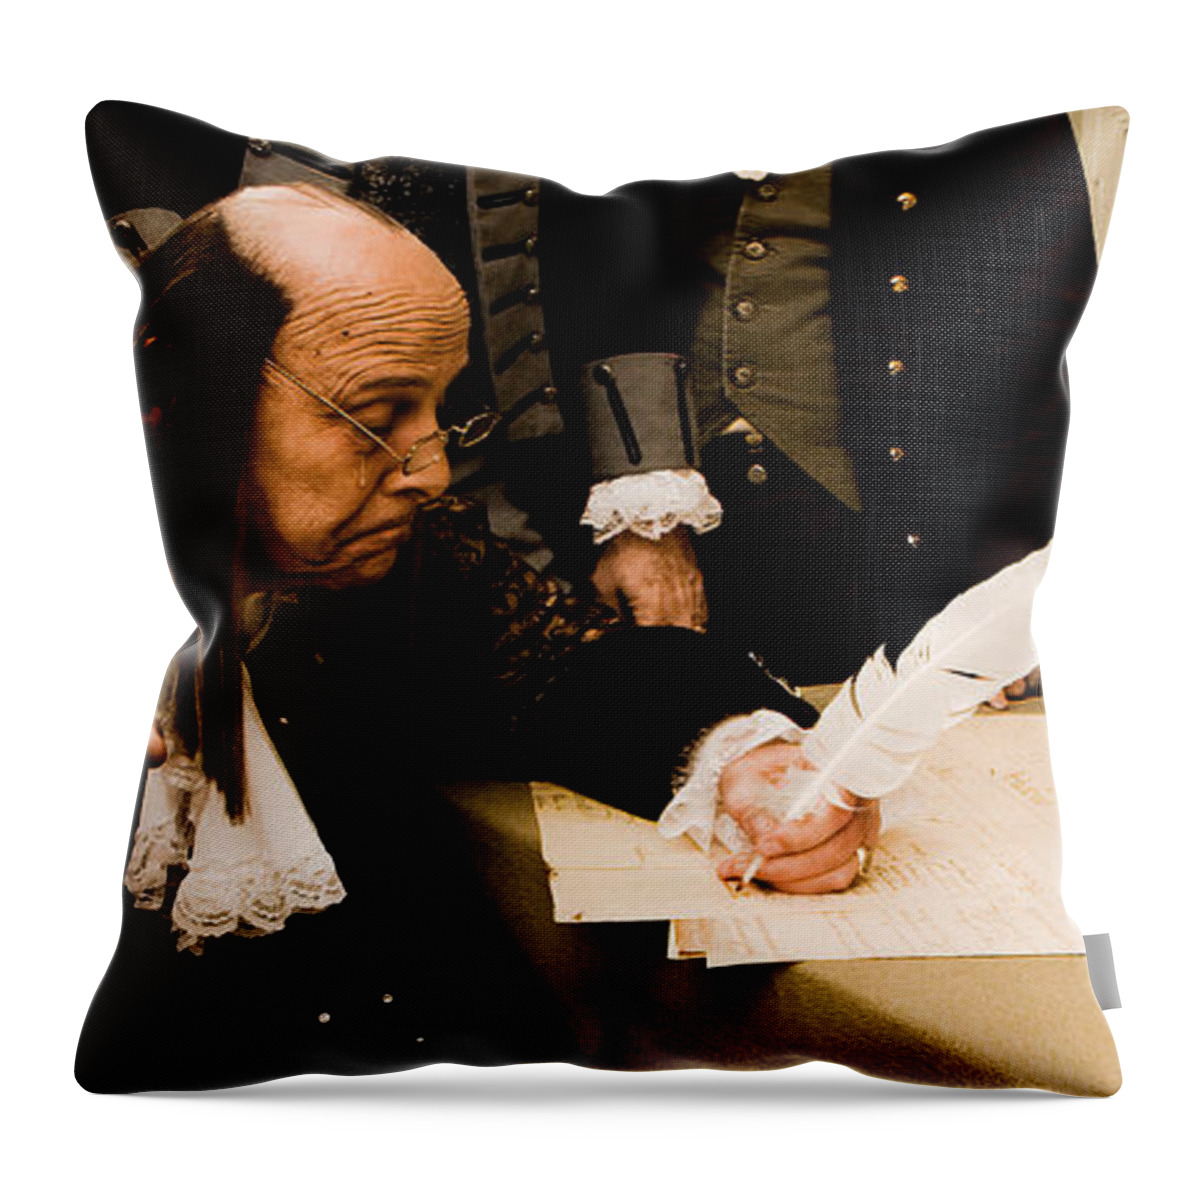 Benjamin Franklin Throw Pillow featuring the photograph The Old Man Wept by Helen Thomas Robson